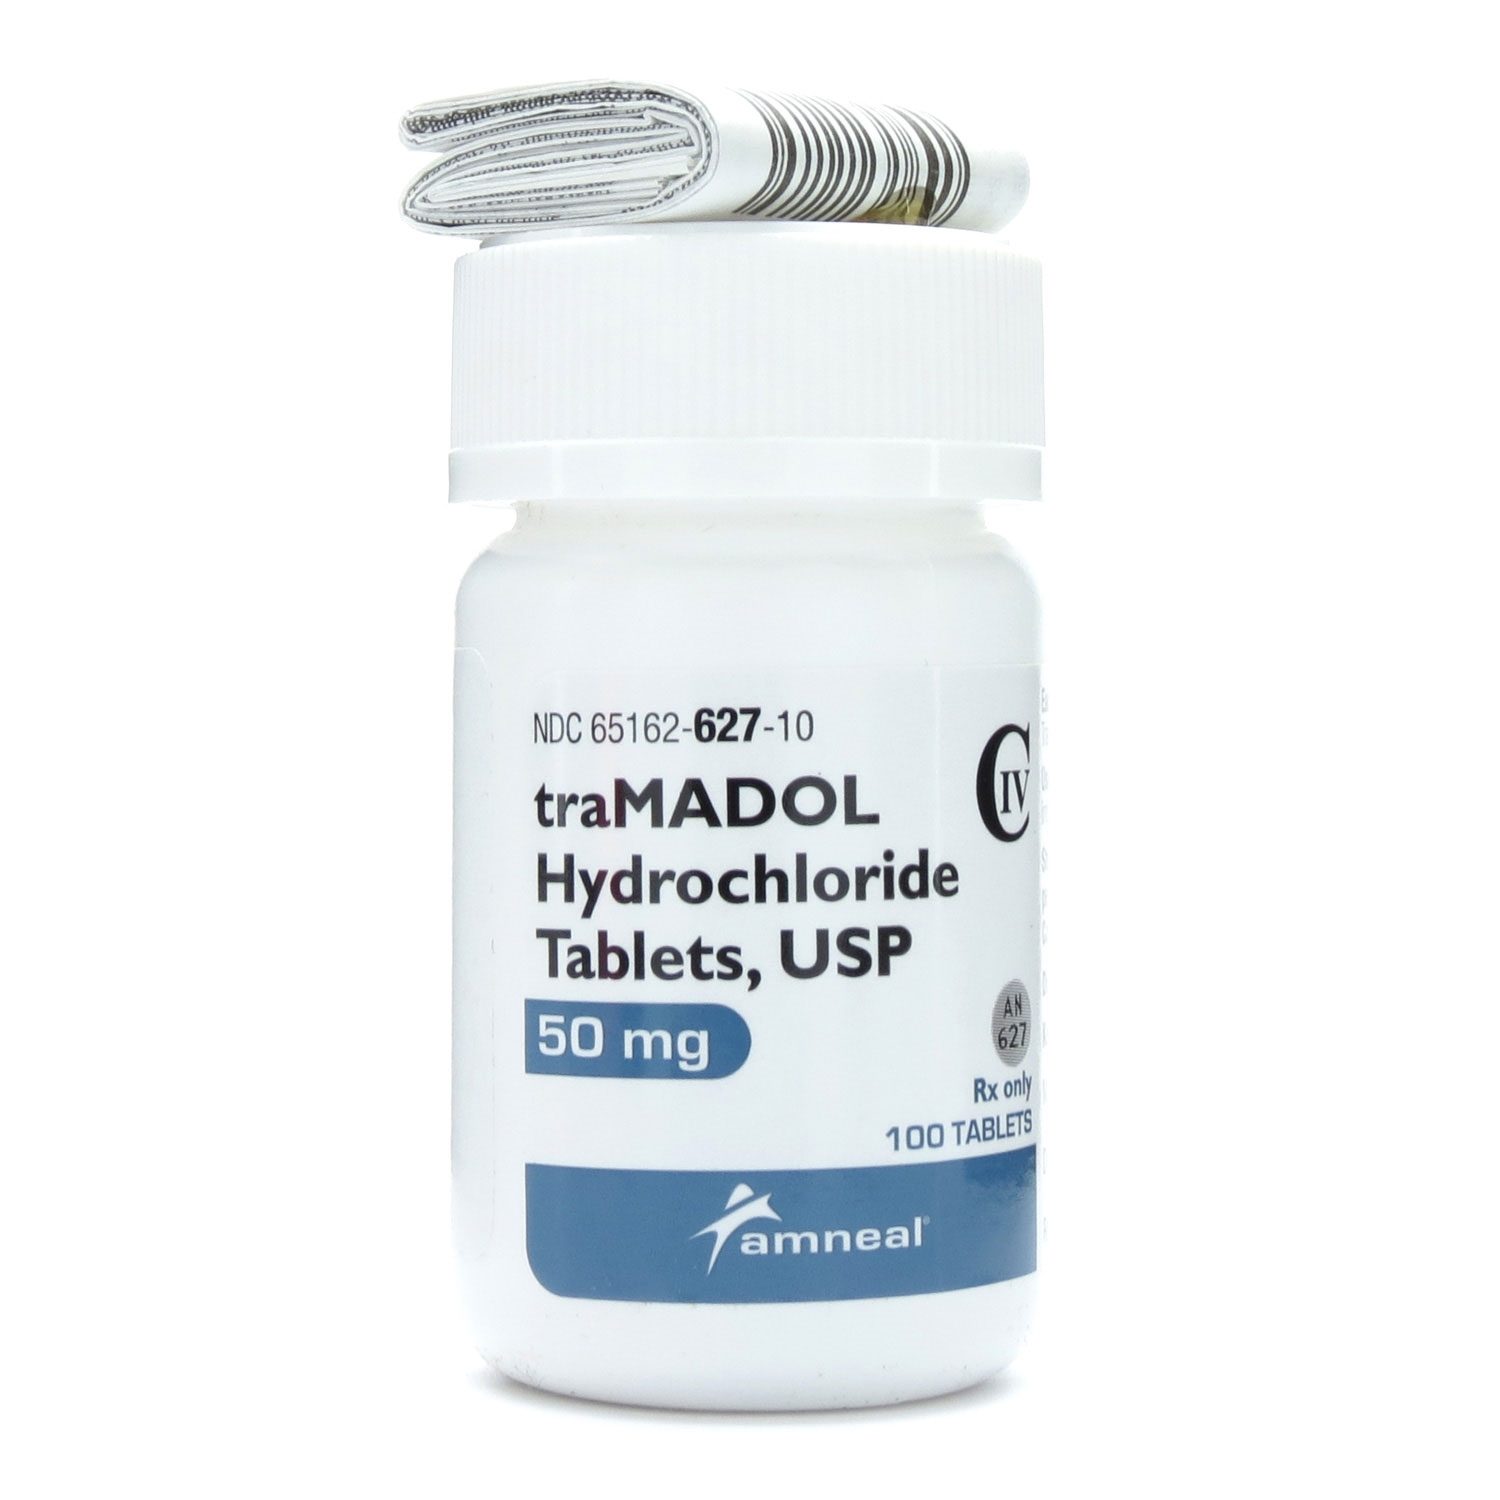 tramadol for dogs dosage for 50 pounds